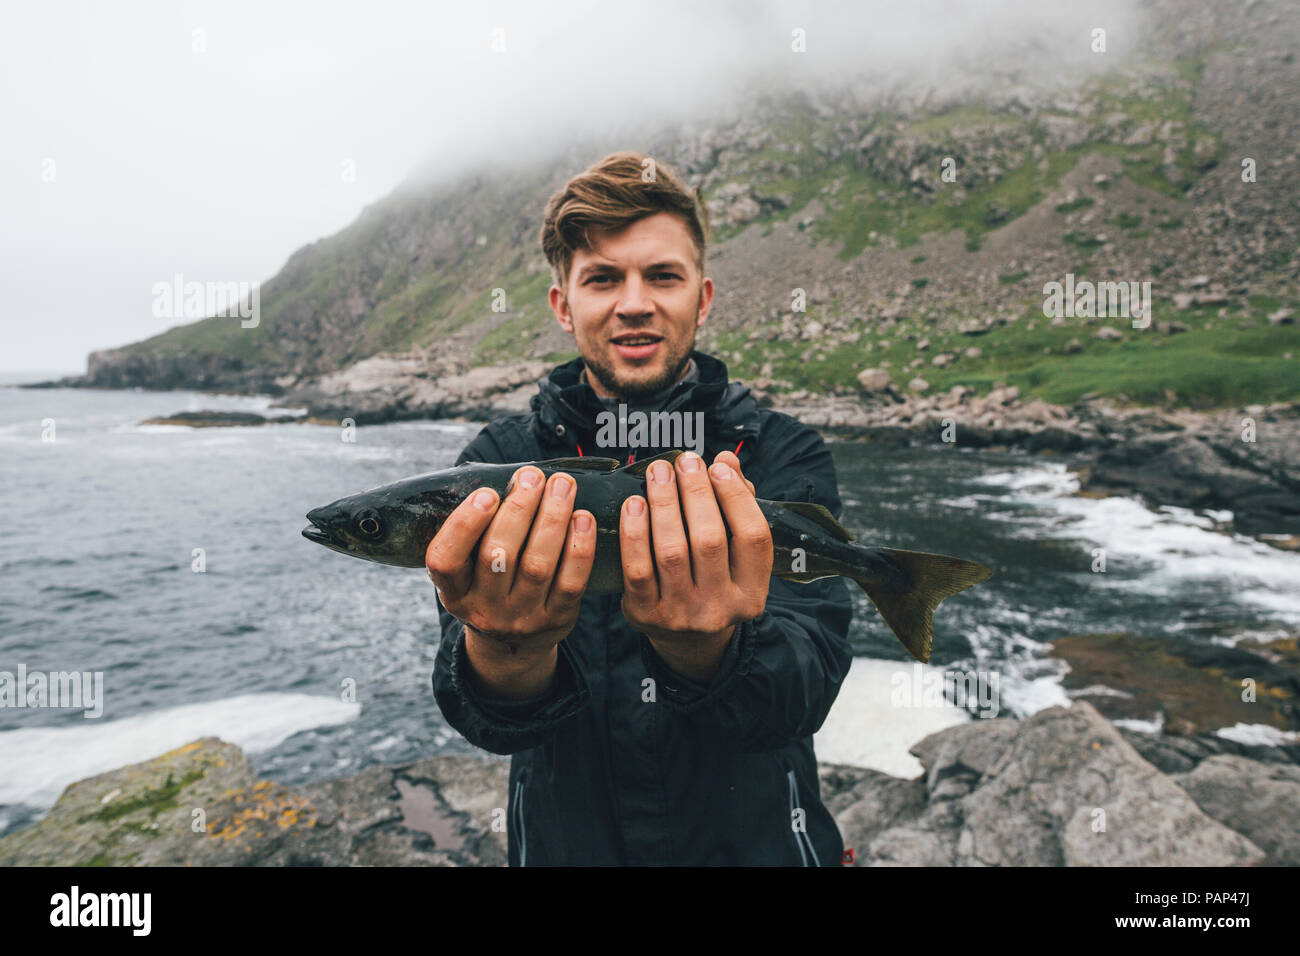 Norway, Lofoten, Moskenesoy, Young man holding freshly caught fish at Horseid beach Stock Photo